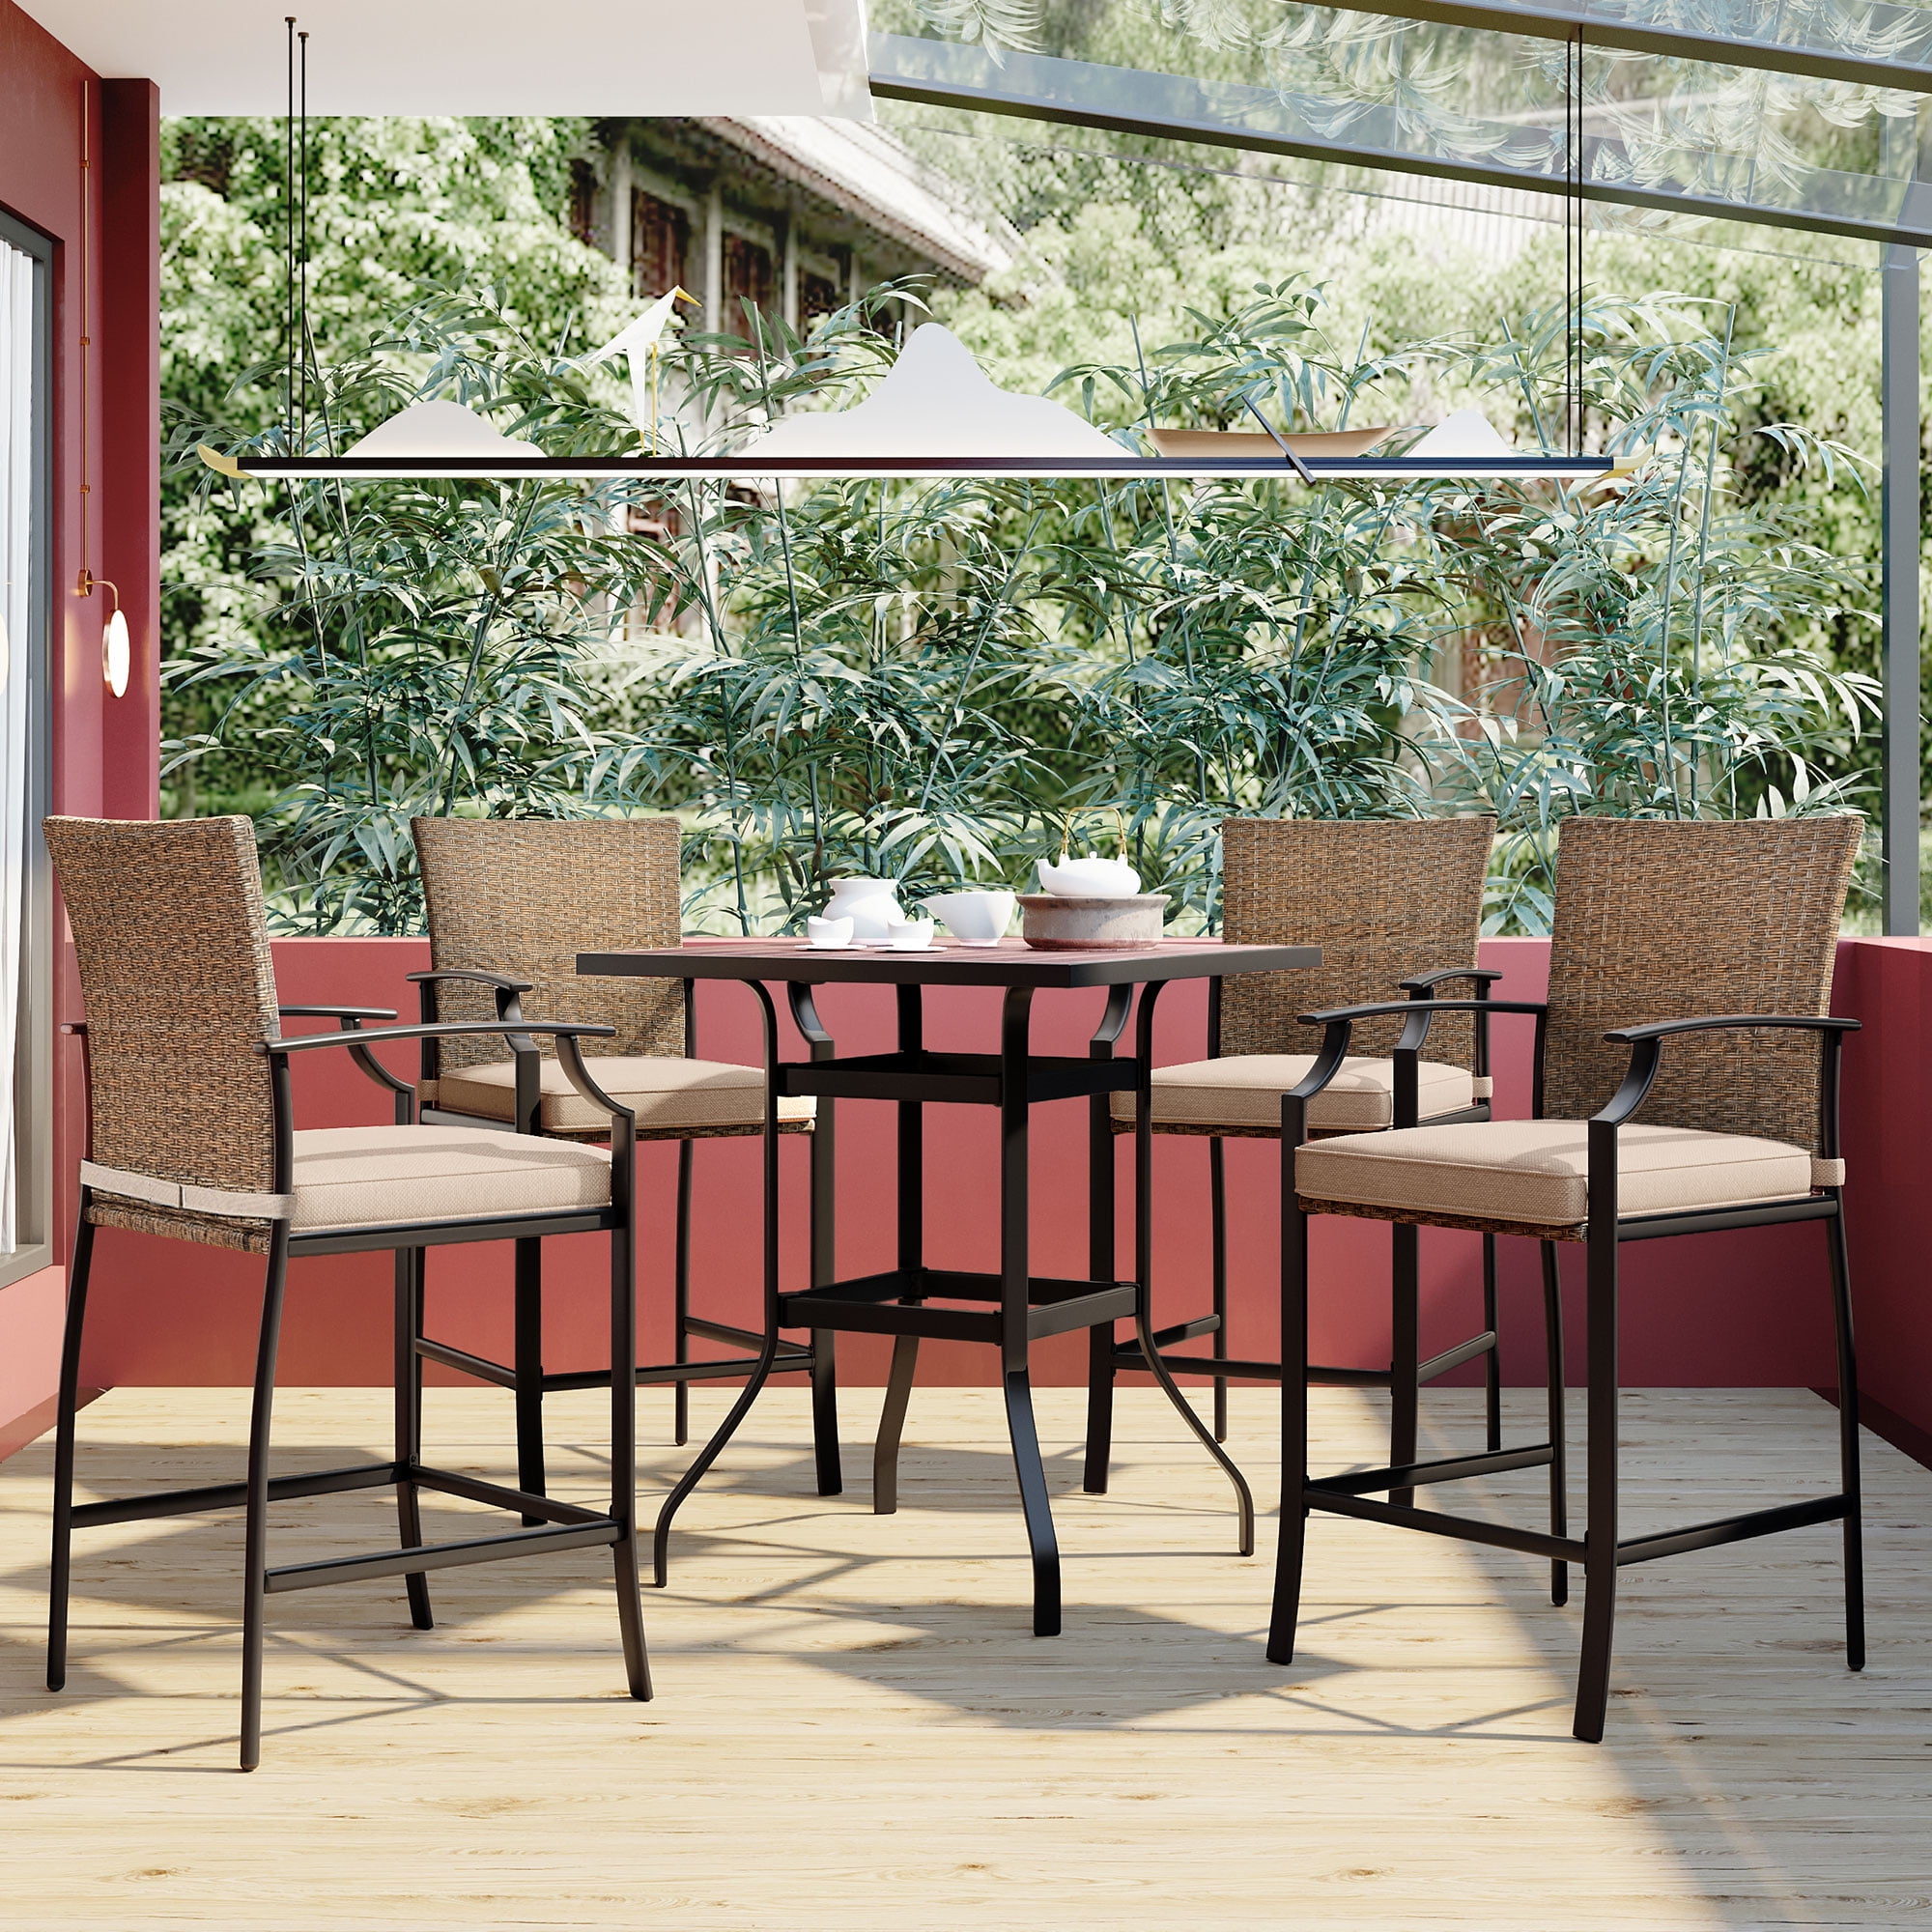 Rattan Wicker Brown 5 Piece Outdoor Patio Table and Chairs Dining Furniture Set 